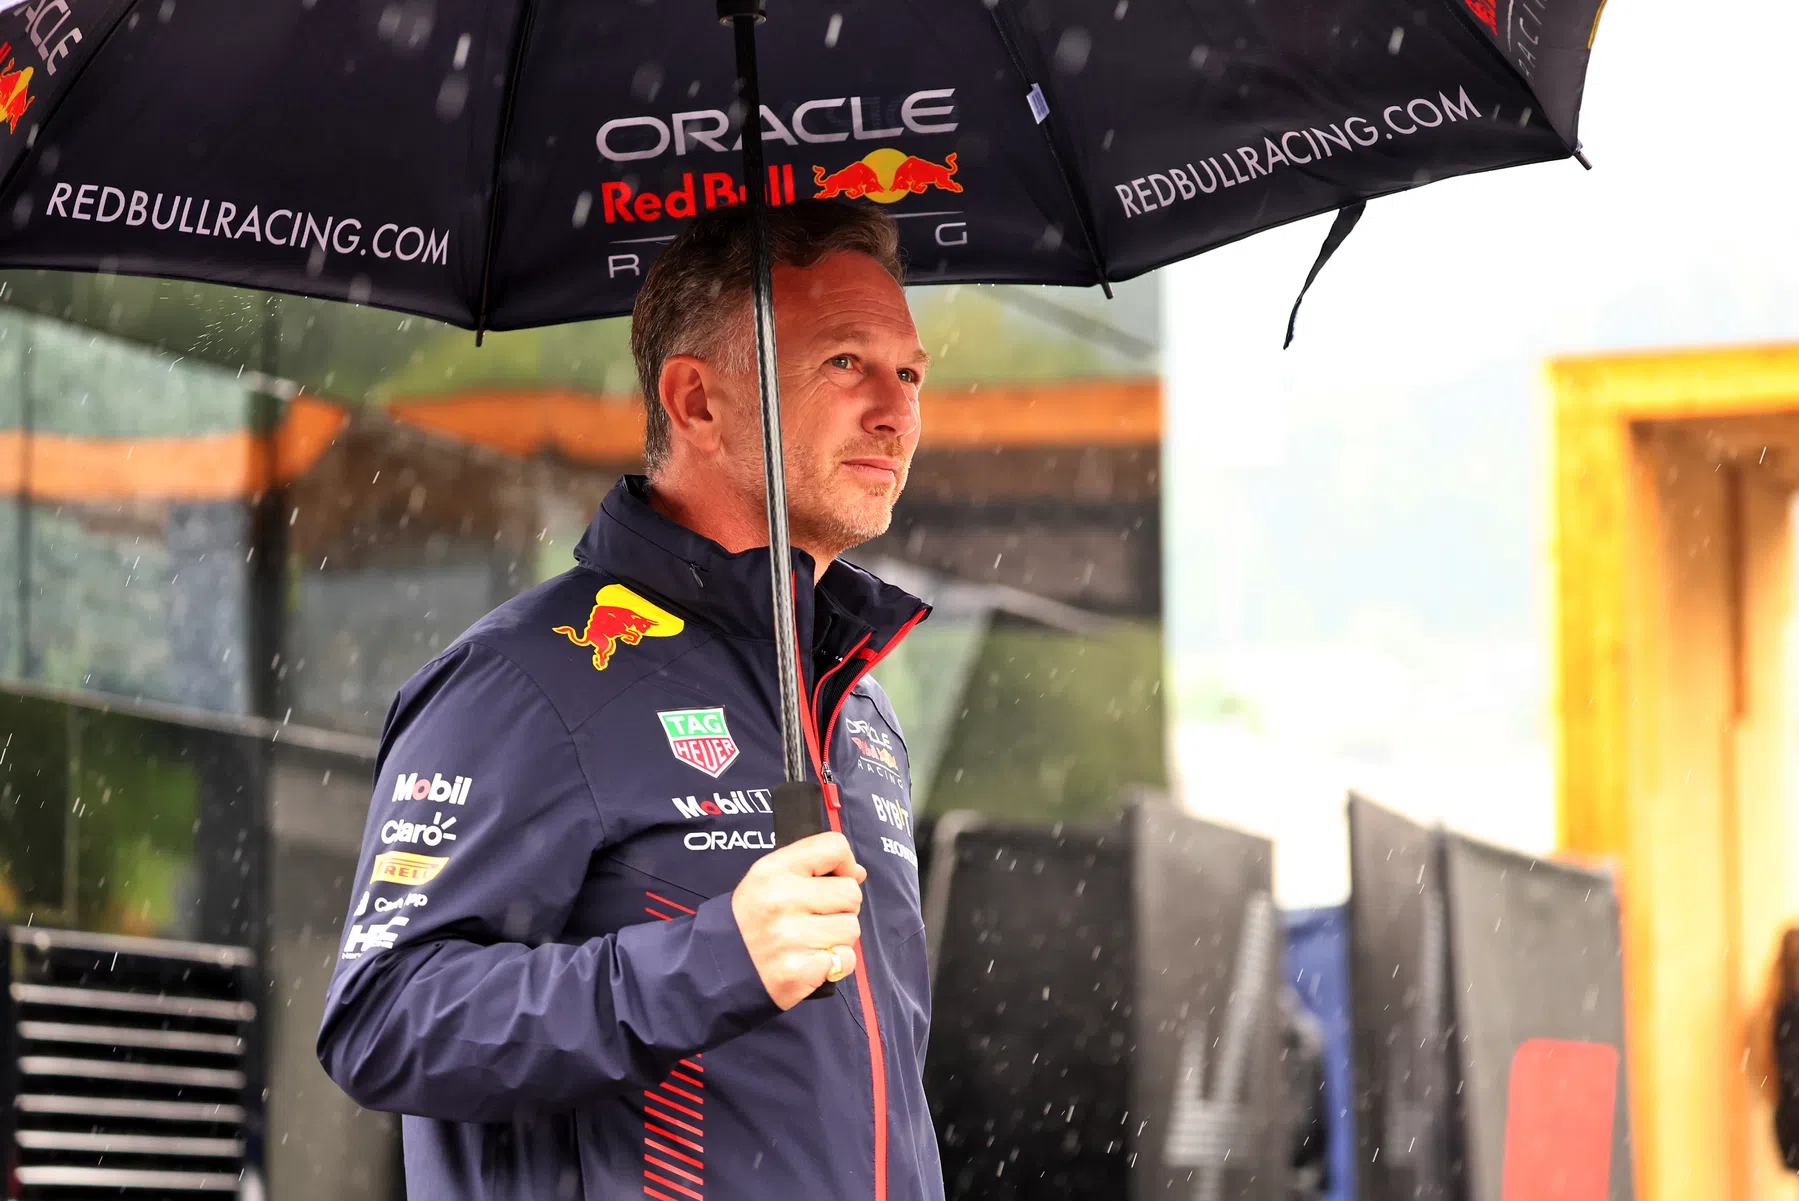 Old fashioned to think of power struggle at Red Bull Racing